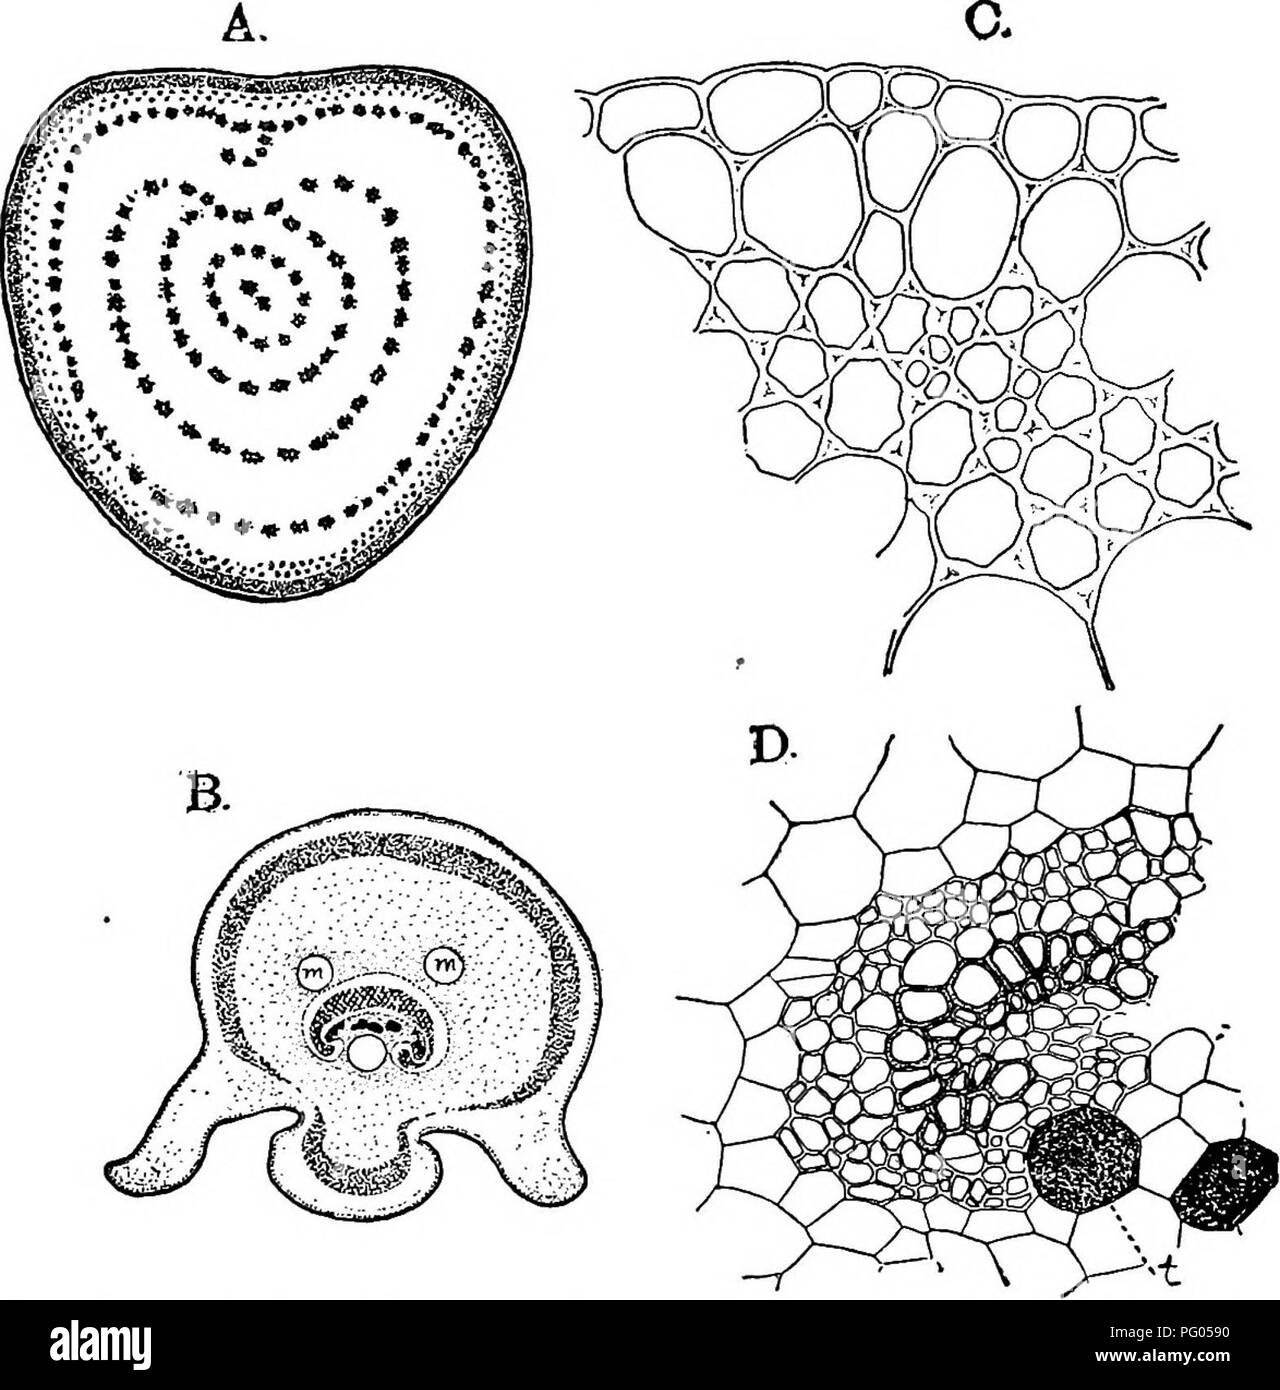 . The structure and development of mosses and ferns (Archegoniatae). Plant morphology; Mosses; Ferns. vin MARATTIALES 289 The Adult Sporophyte According to Holle (1. c. p. 218) the four-sided apical cell found in the stem of the young sporophyte of Marattia is re- tained permanently, but in Angiopteris this is not the case, as in the older sporophyte a single apical cell is not certainly to be made out. Bower ((11) p. 324) comes to the same conclusion. Fig. 161.—A, Section of the stipe of Angiopteris evecta, natural size; B, section of the rachis of the ultimate division of the leaf of Maratti Stock Photo